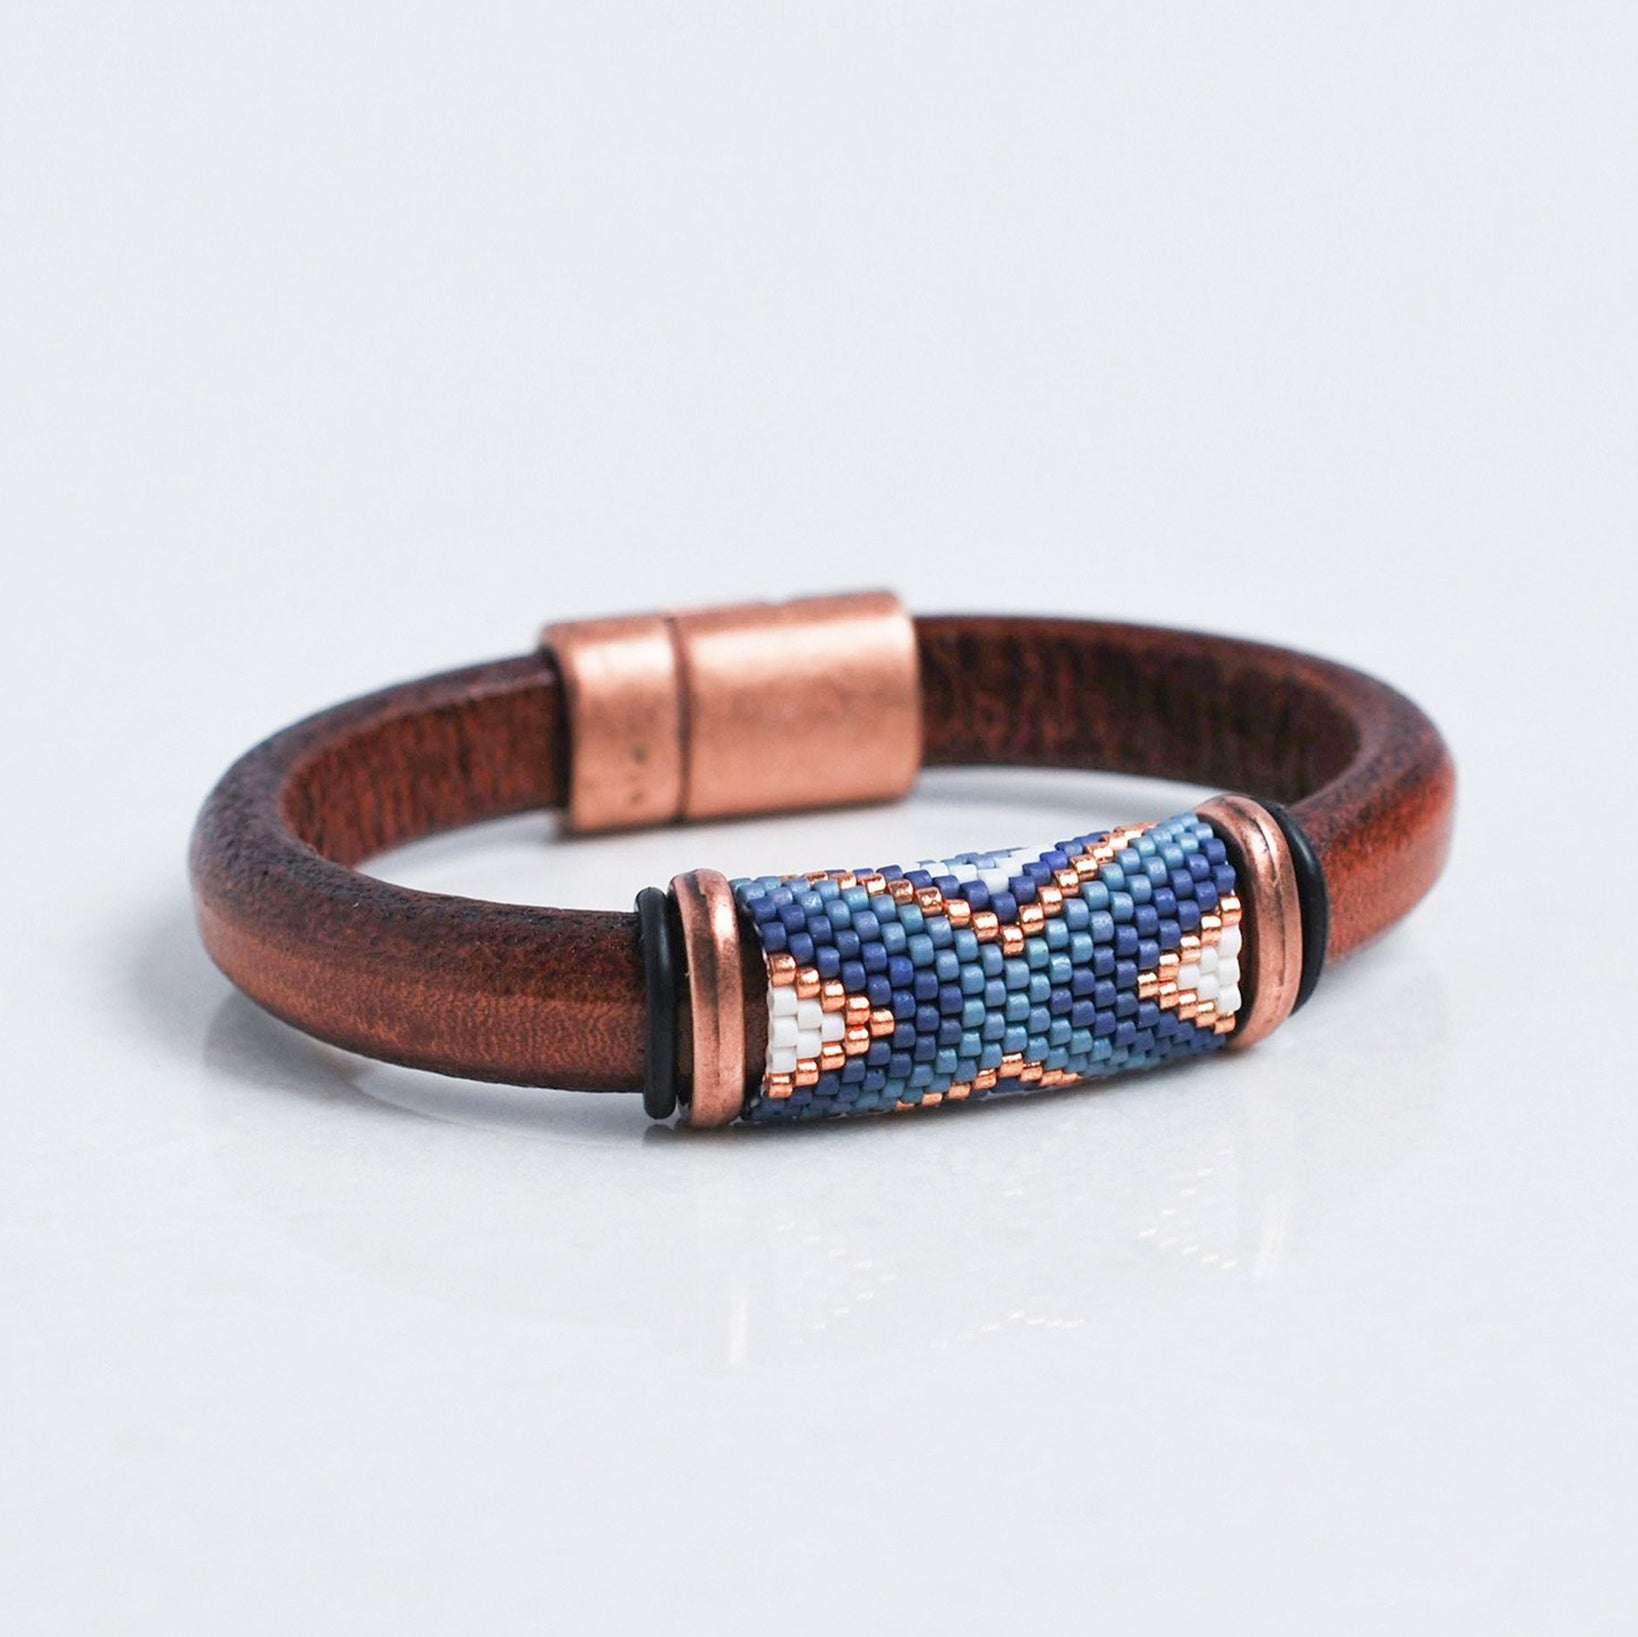 Handcrafted leather bracelets